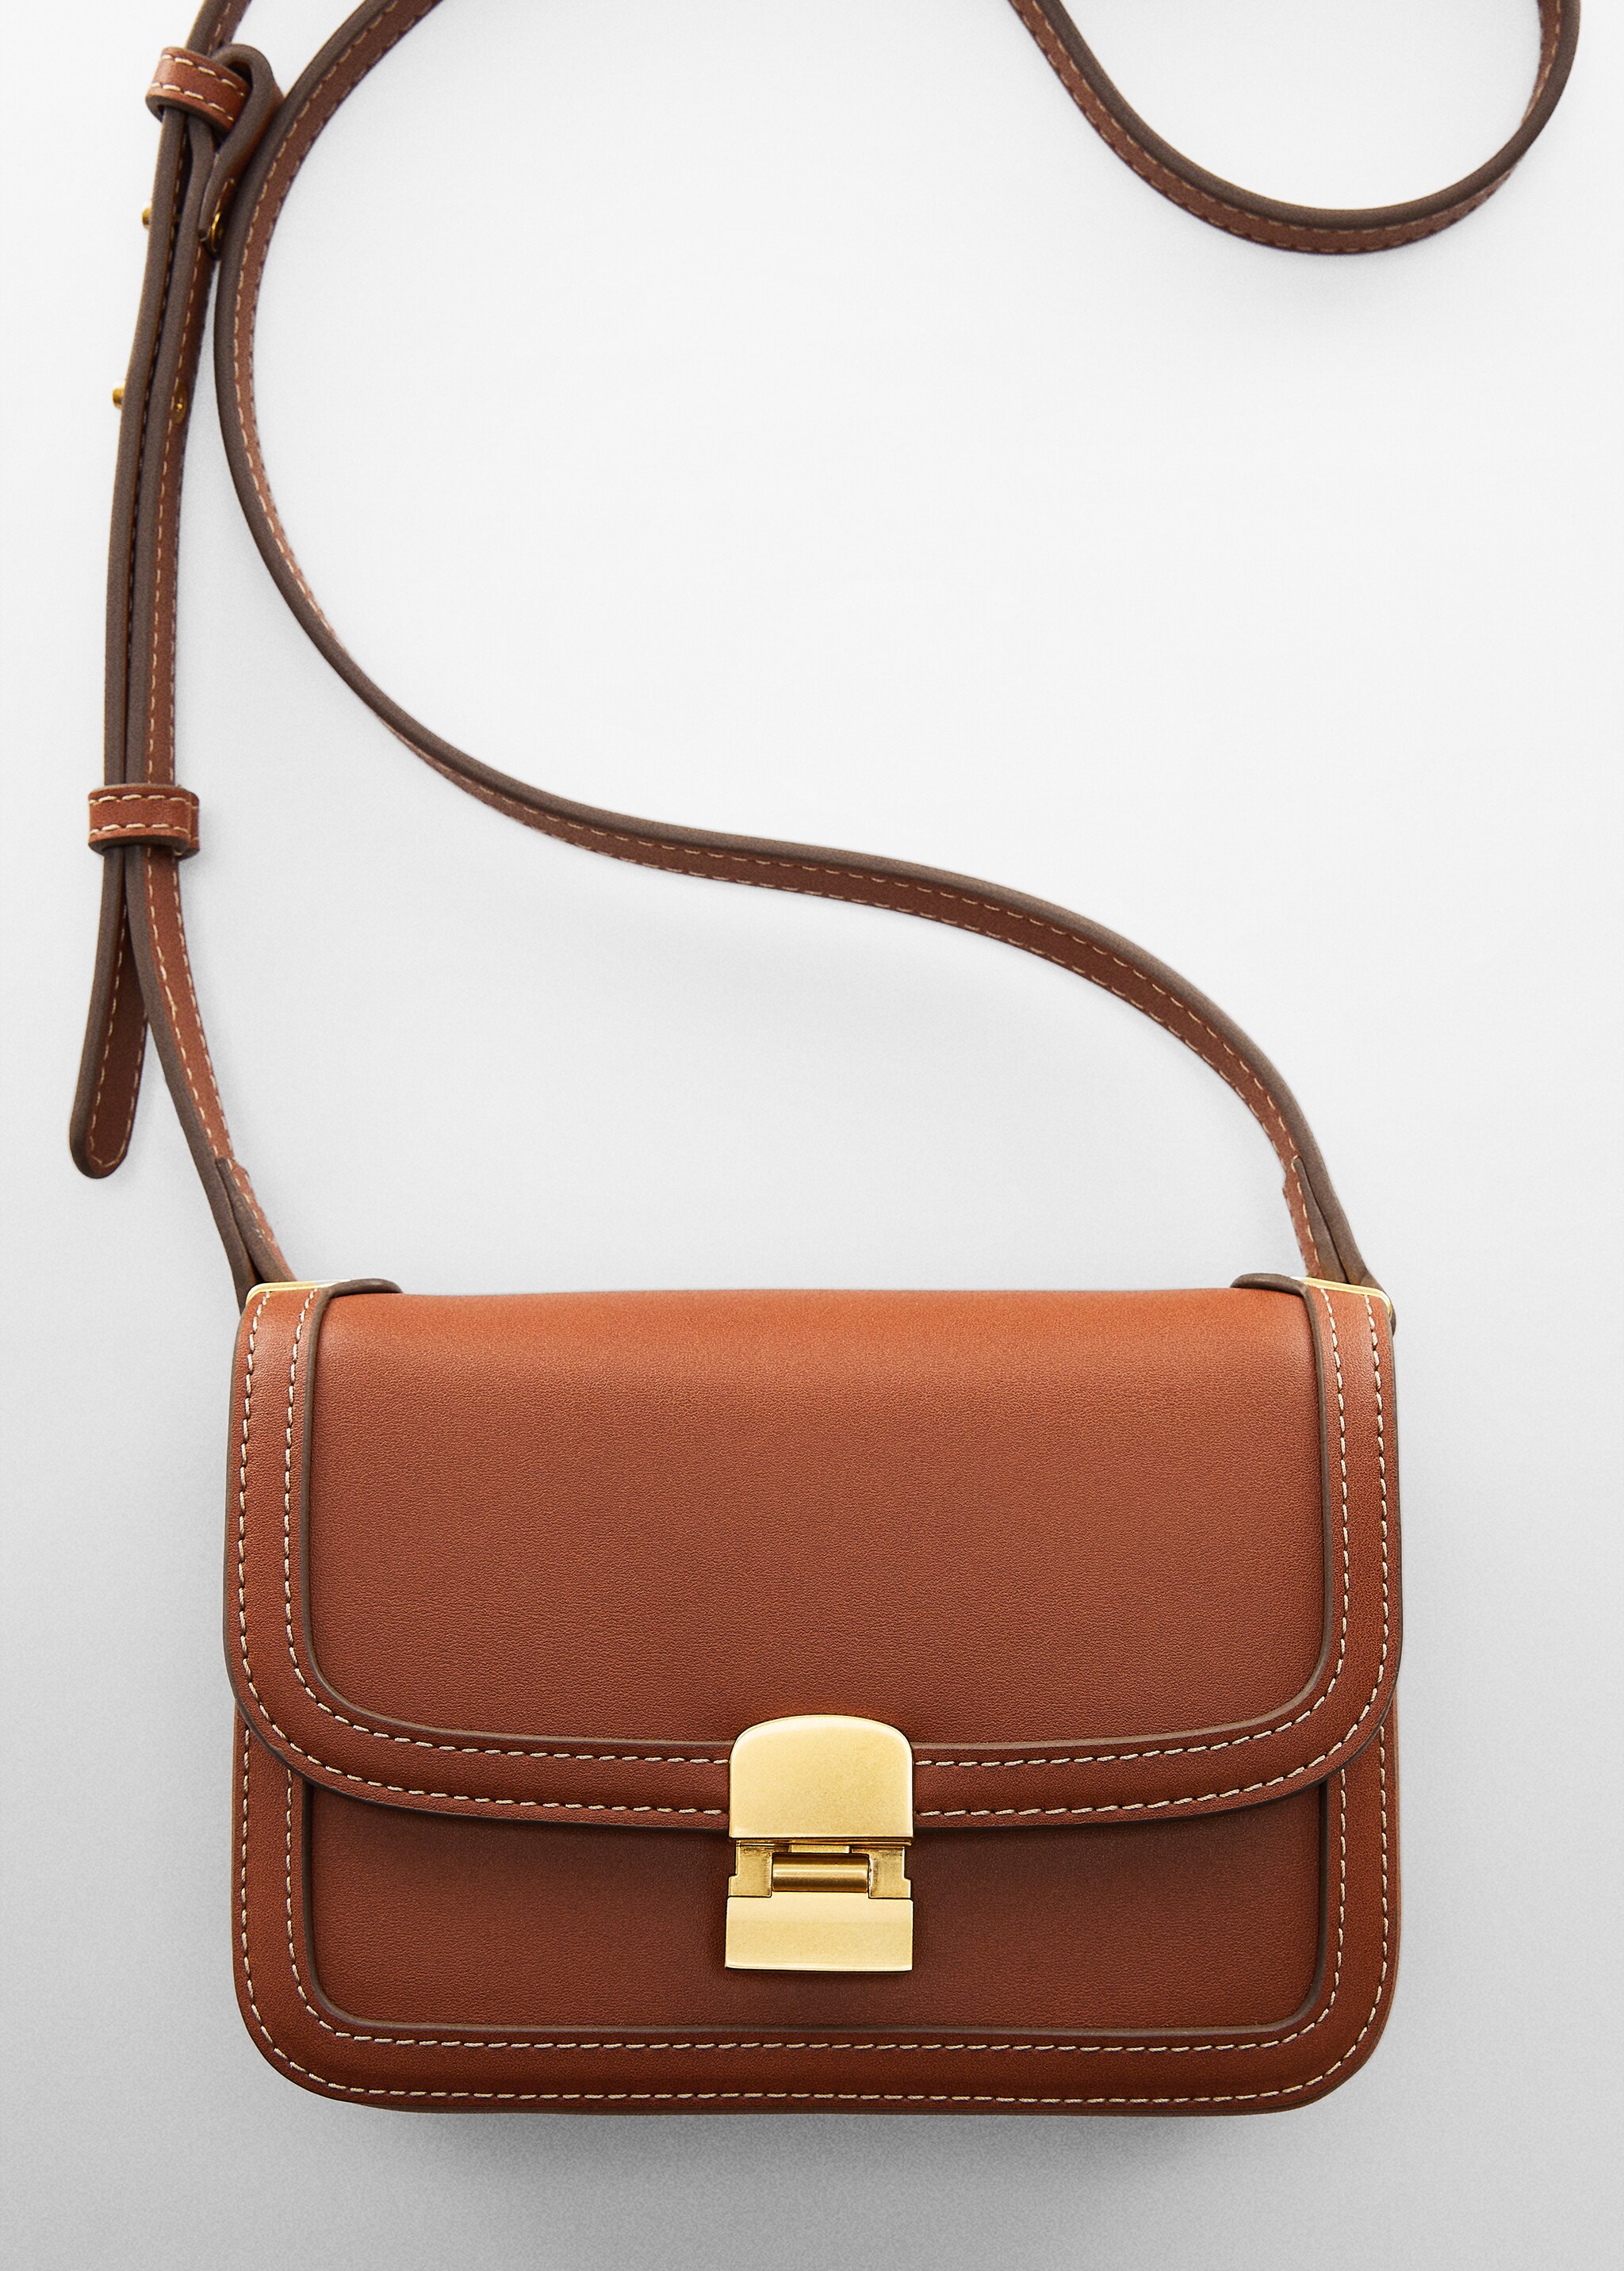 Crossbody bag with flap - Details of the article 5